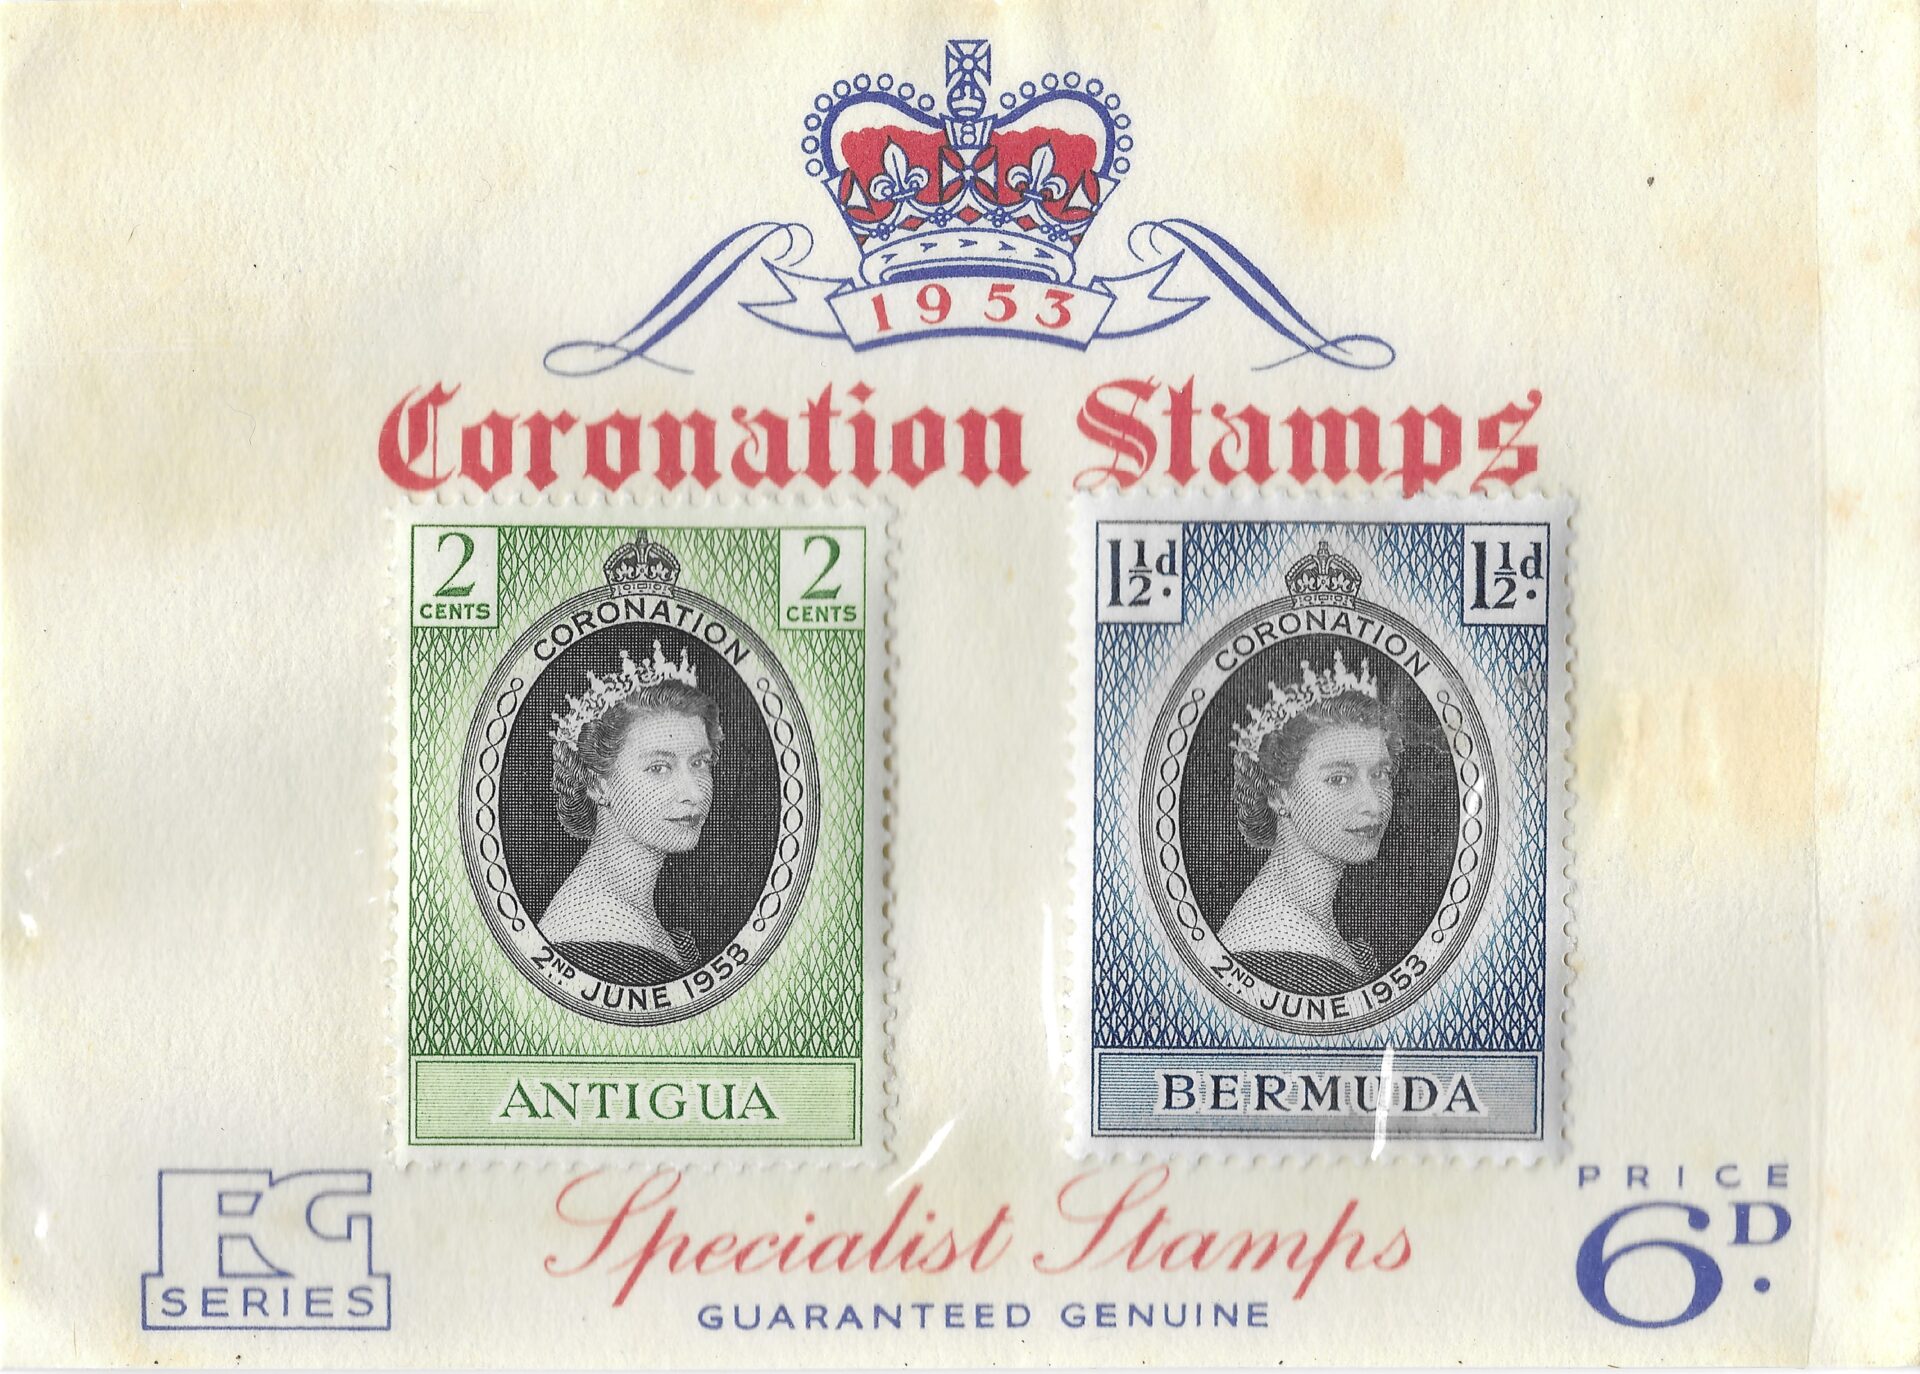 Queen Elizabeth’s Coronation Stamps, 1953 | Stamp Collecting